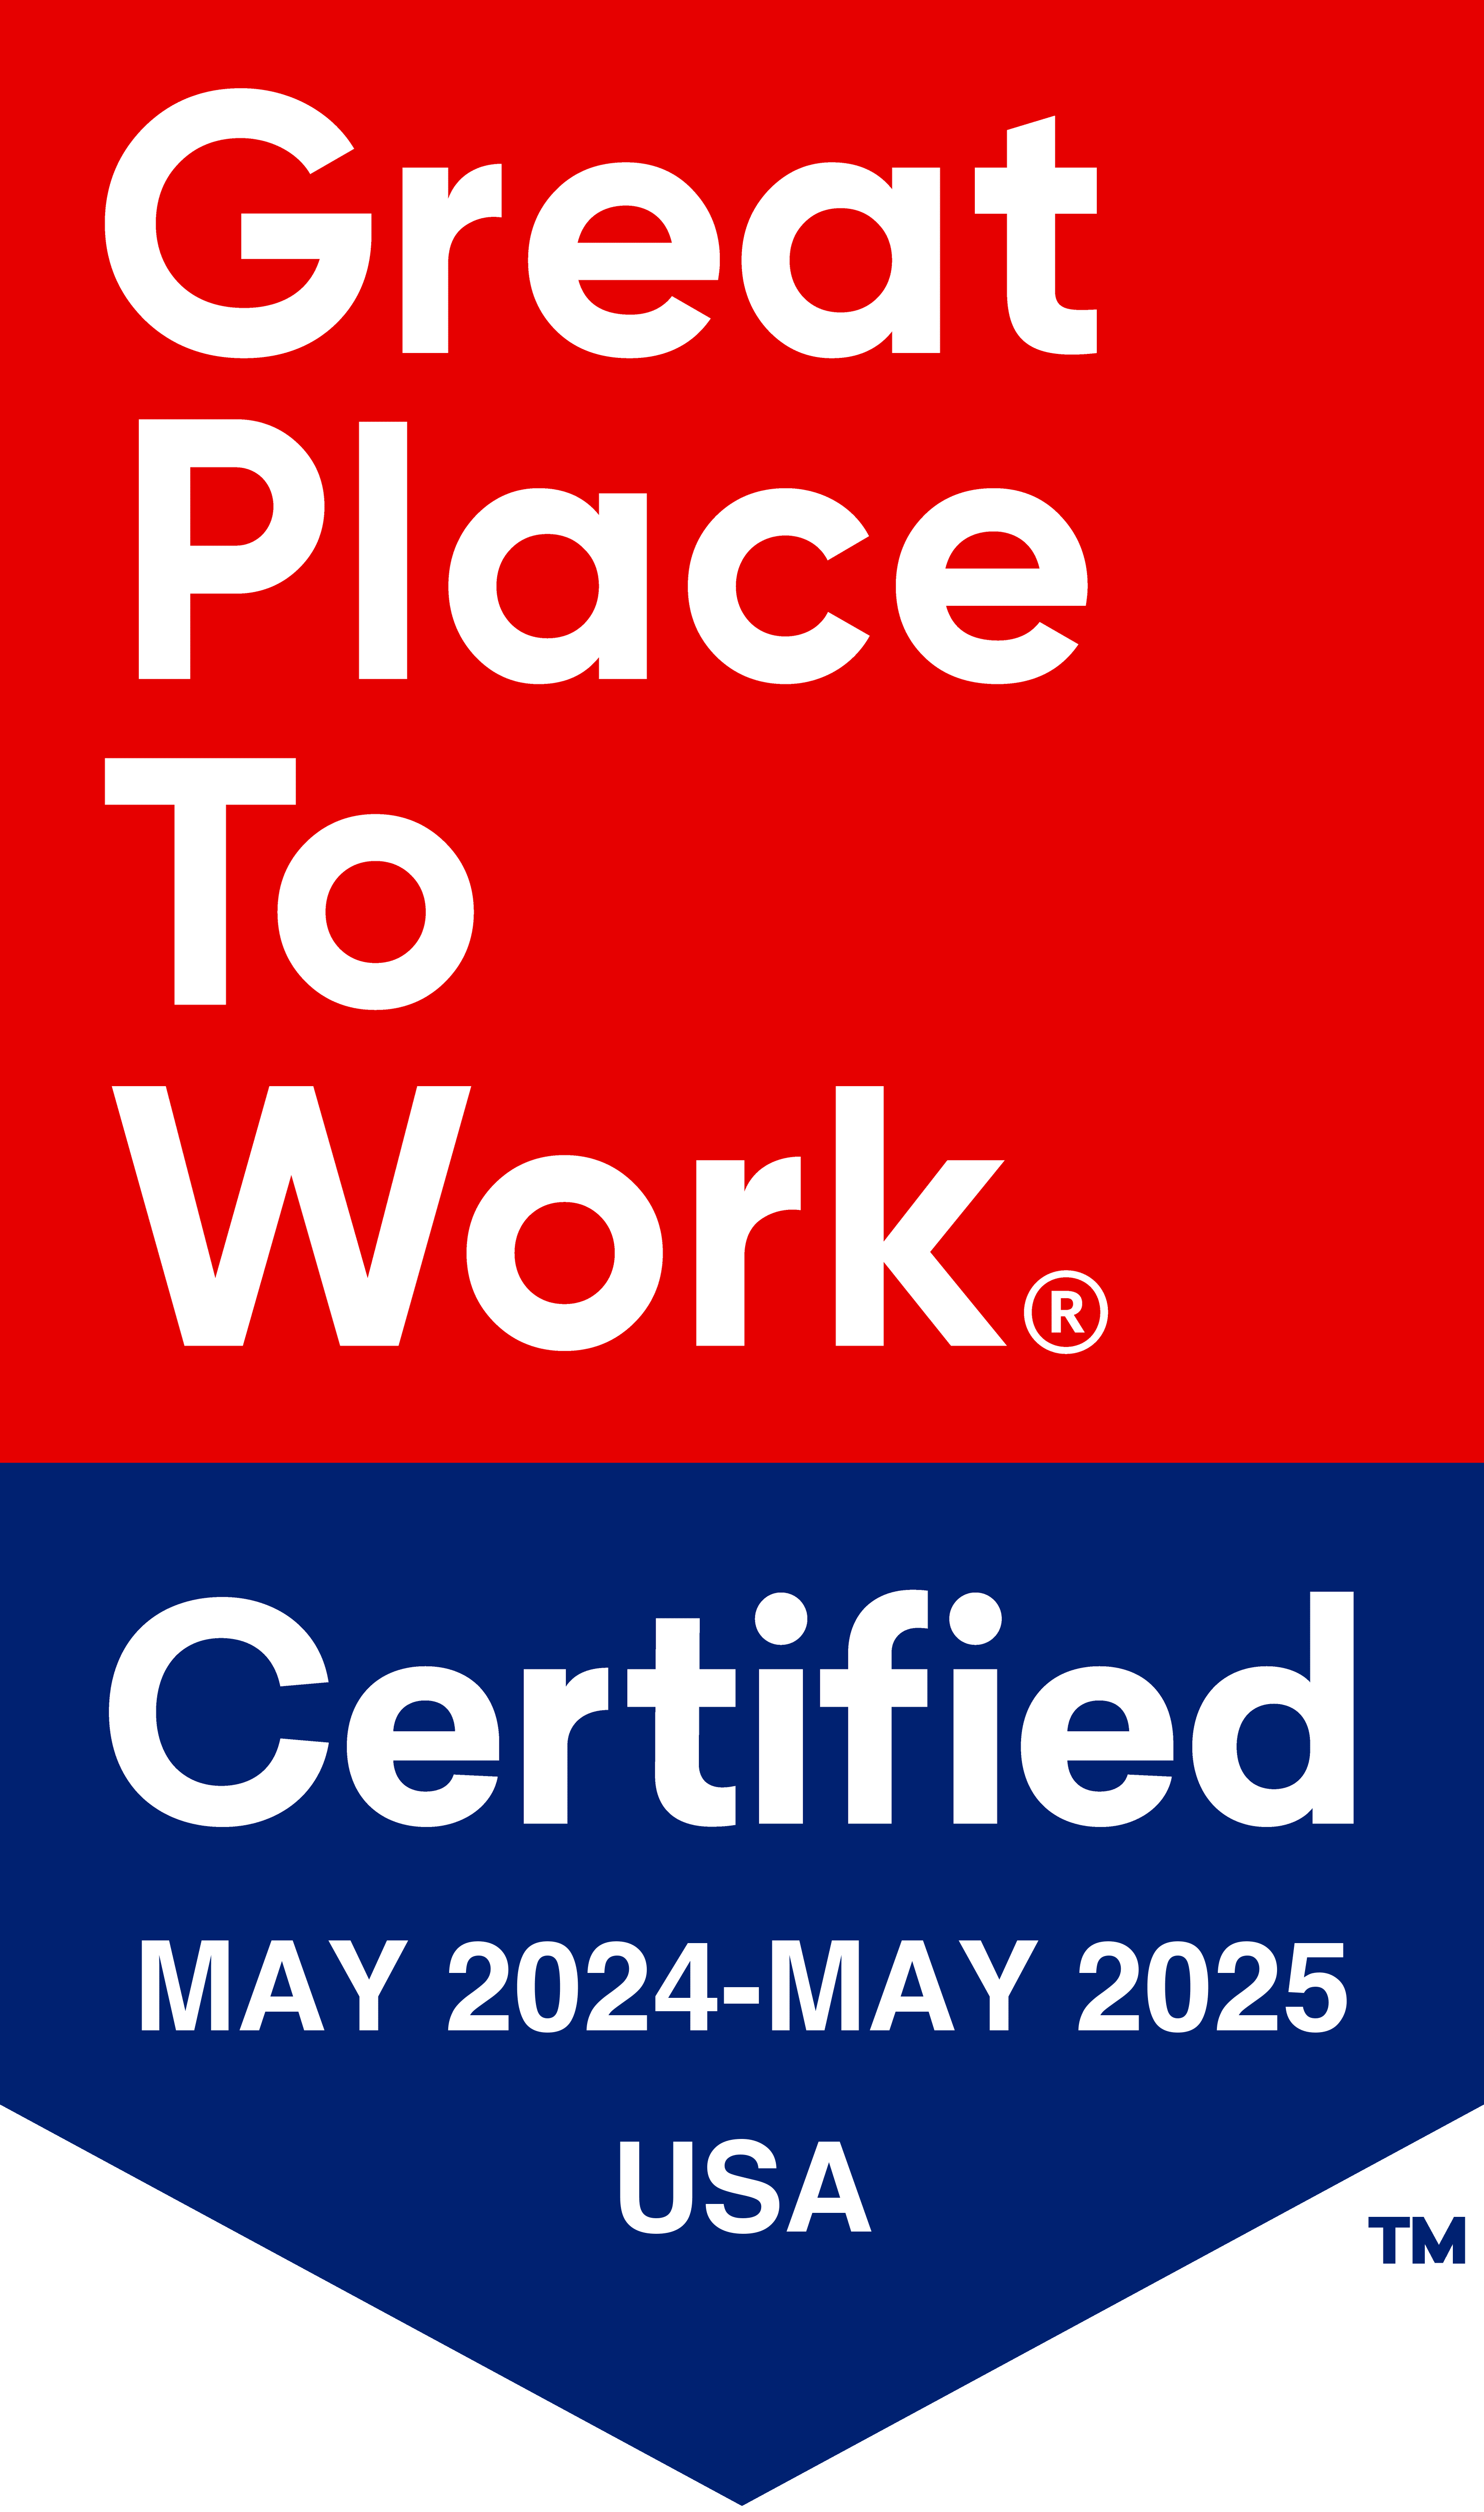 Great place to work logo for Clearwater at South Bay in Torrance, California